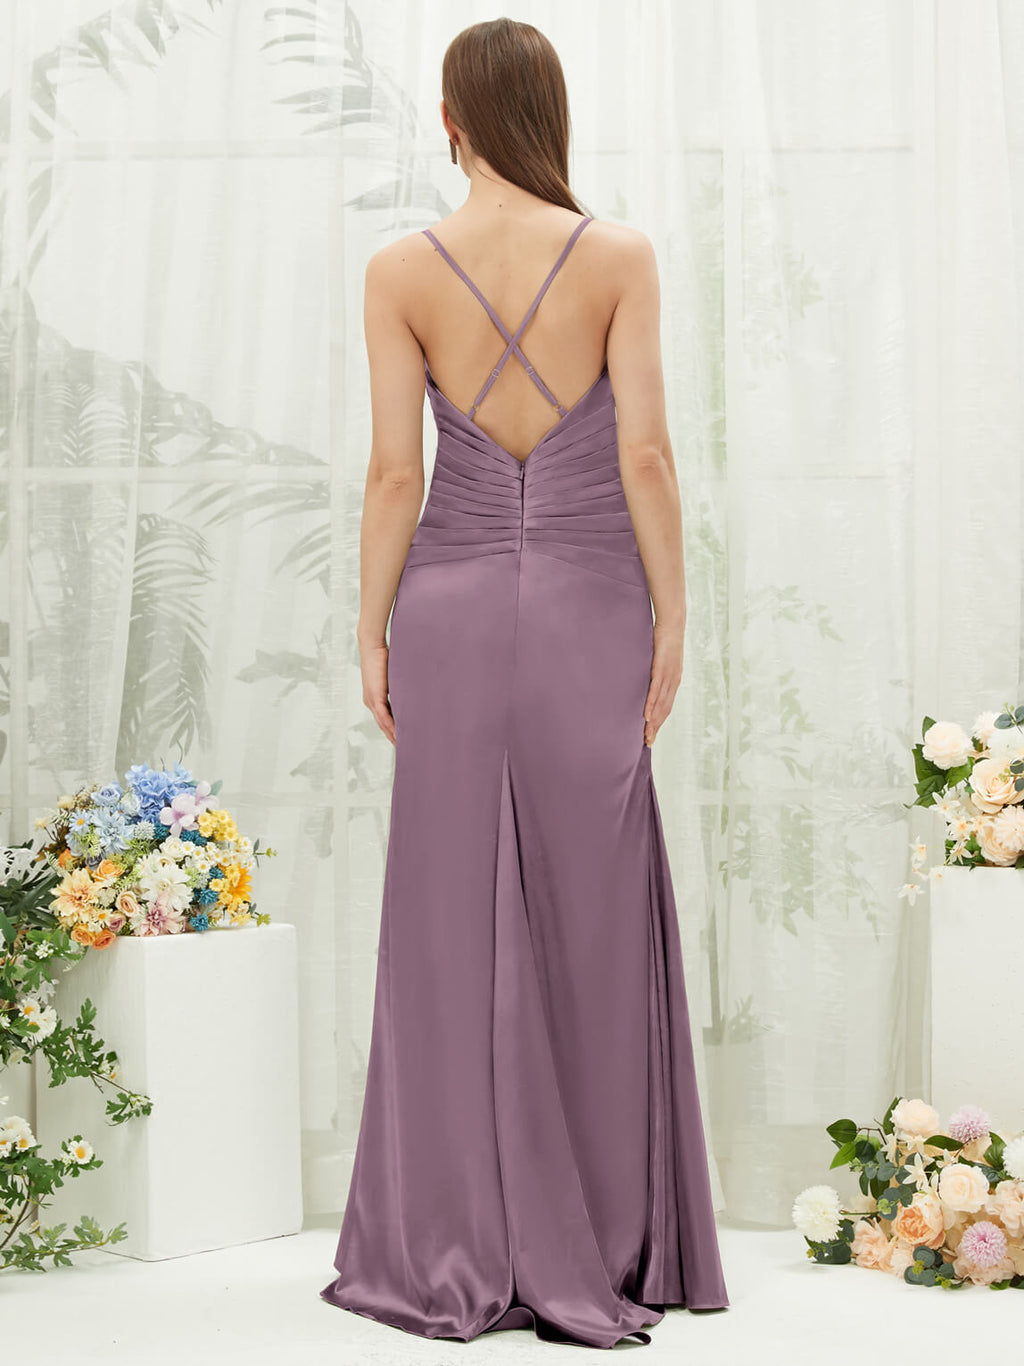 NZ Bridal Pleated Sweetheart Neck Satin Wisteria bridesmaid dresses CA221470 Rory a